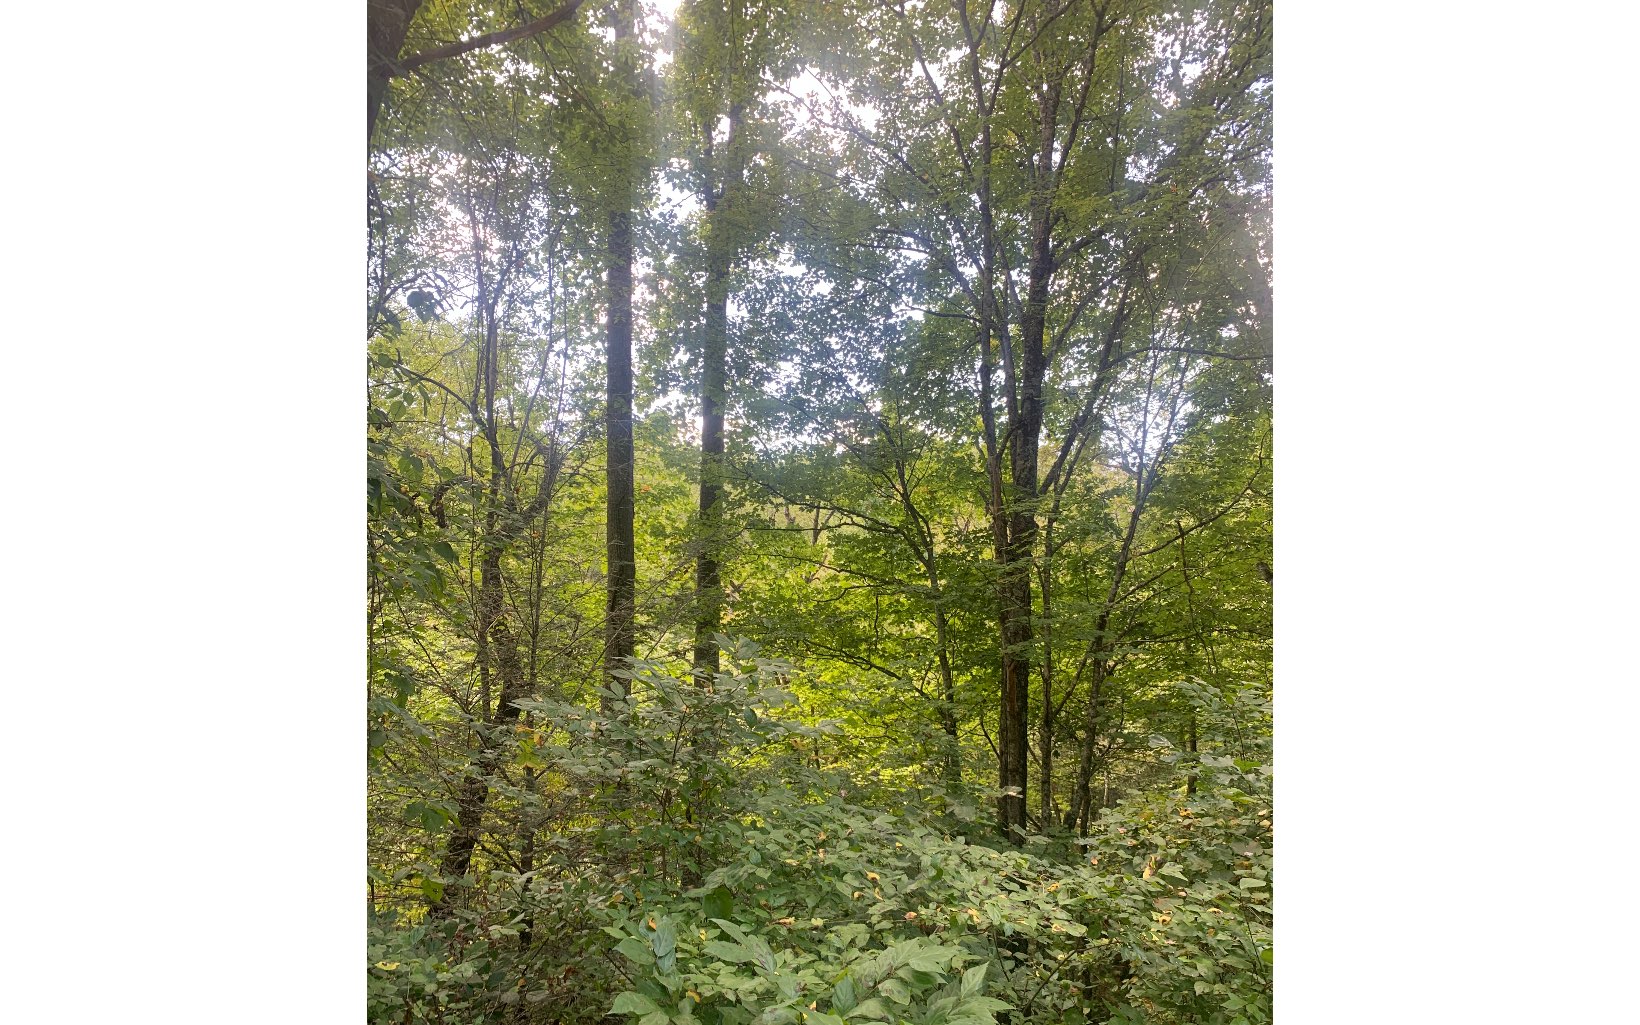 This lovely, secluded lot has so much potential. It has a nice private location with no construction above it. The land is wooded for privacy but gives a lot of opportunity when cleared, for building your dream home in a private area. The location of the lot is so close to town, but yet you can get away when you're home, to relax. The road is above the lot and has very minimum houses in the area for a quiet, peaceful neighborhood. You don't want to miss this opportunity.